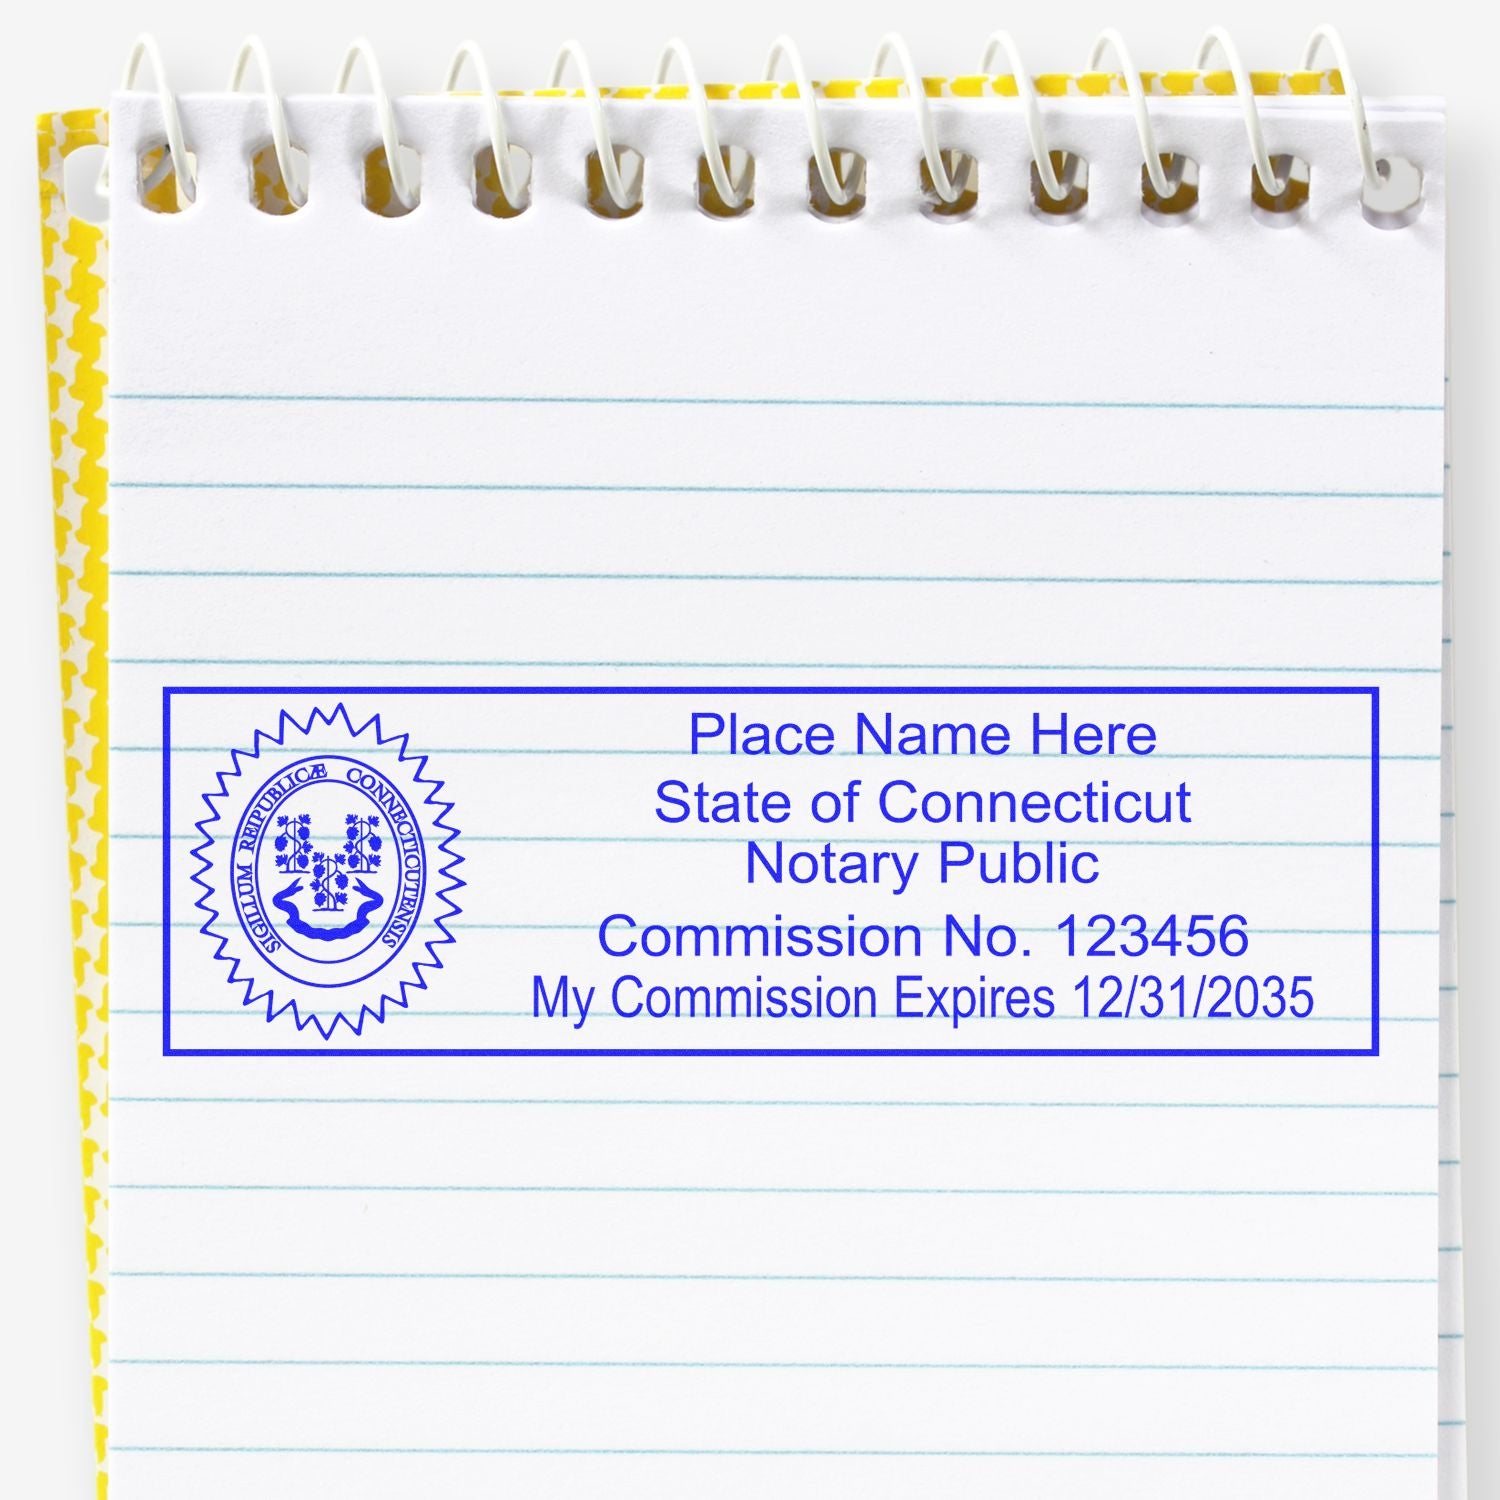 This paper is stamped with a sample imprint of the Wooden Handle Connecticut State Seal Notary Public Stamp, signifying its quality and reliability.